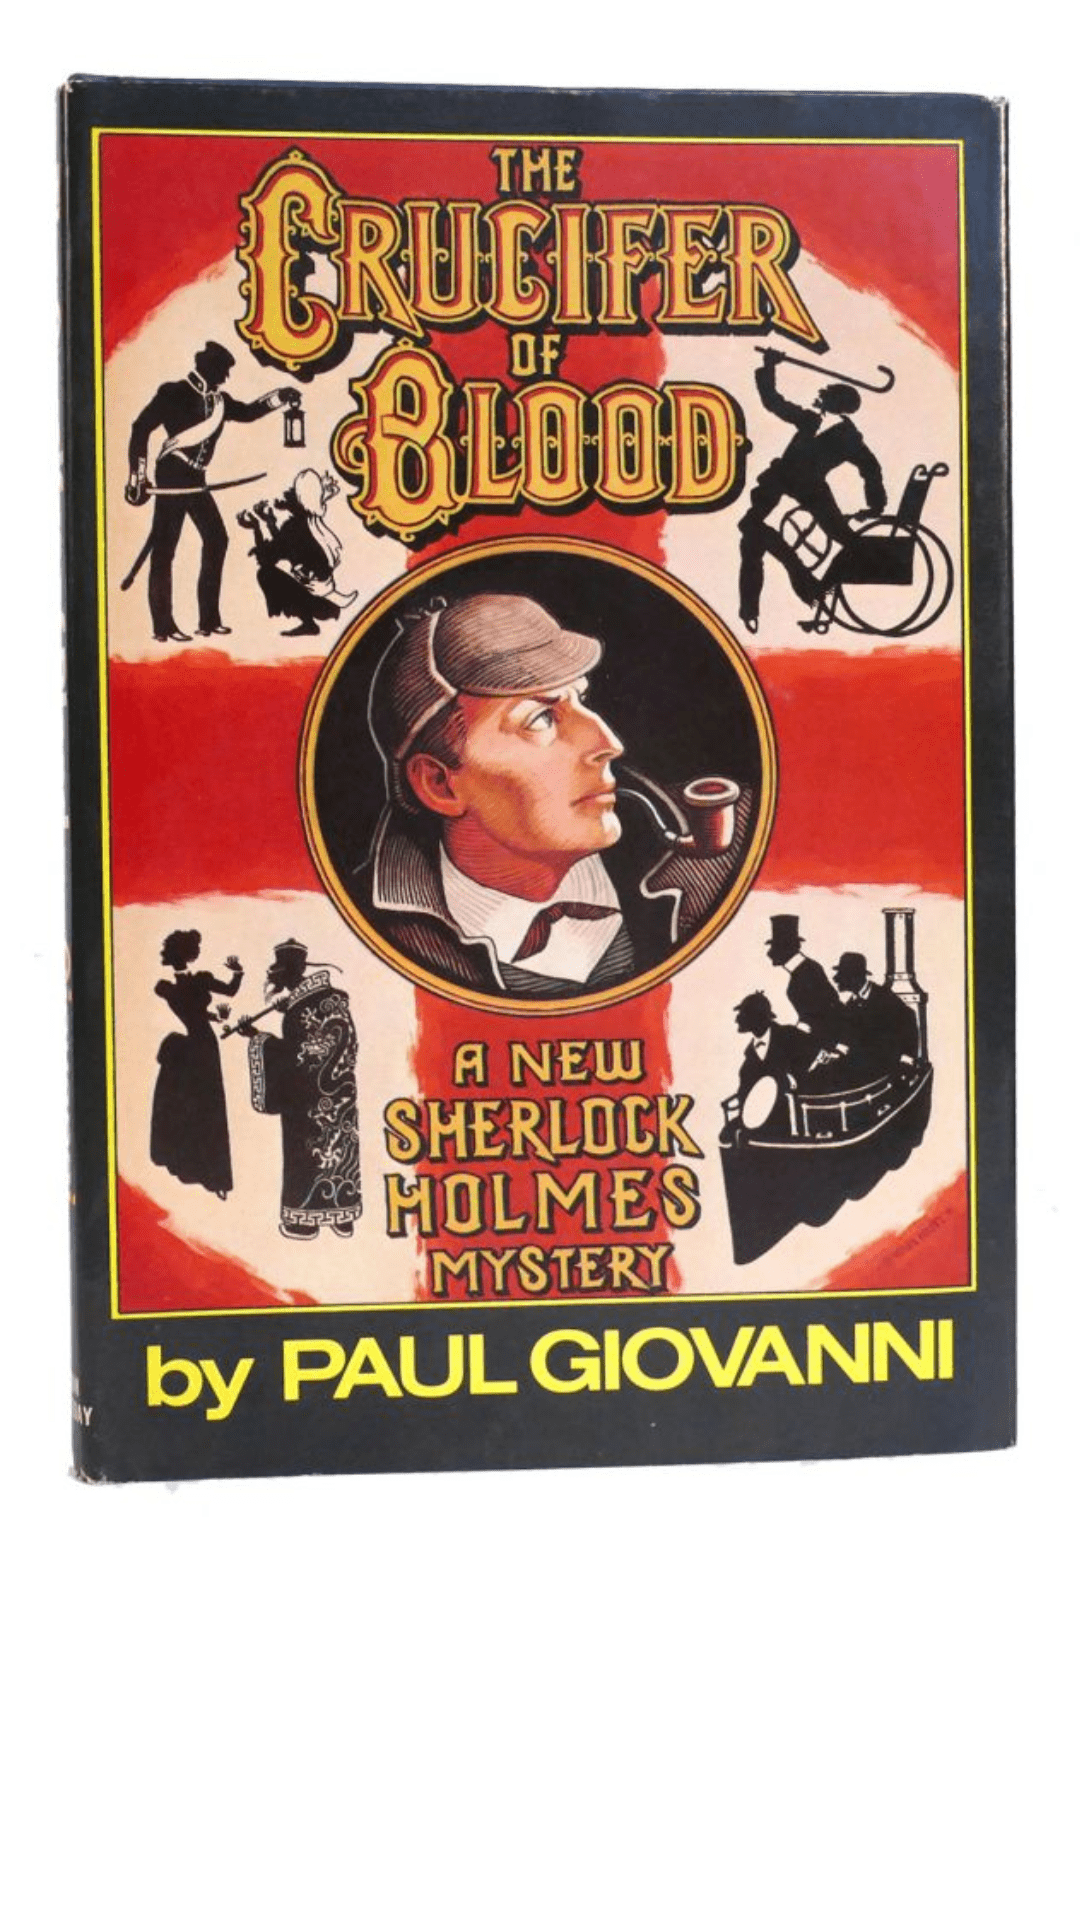 The Crucifer of Blood by Paul Giovanni